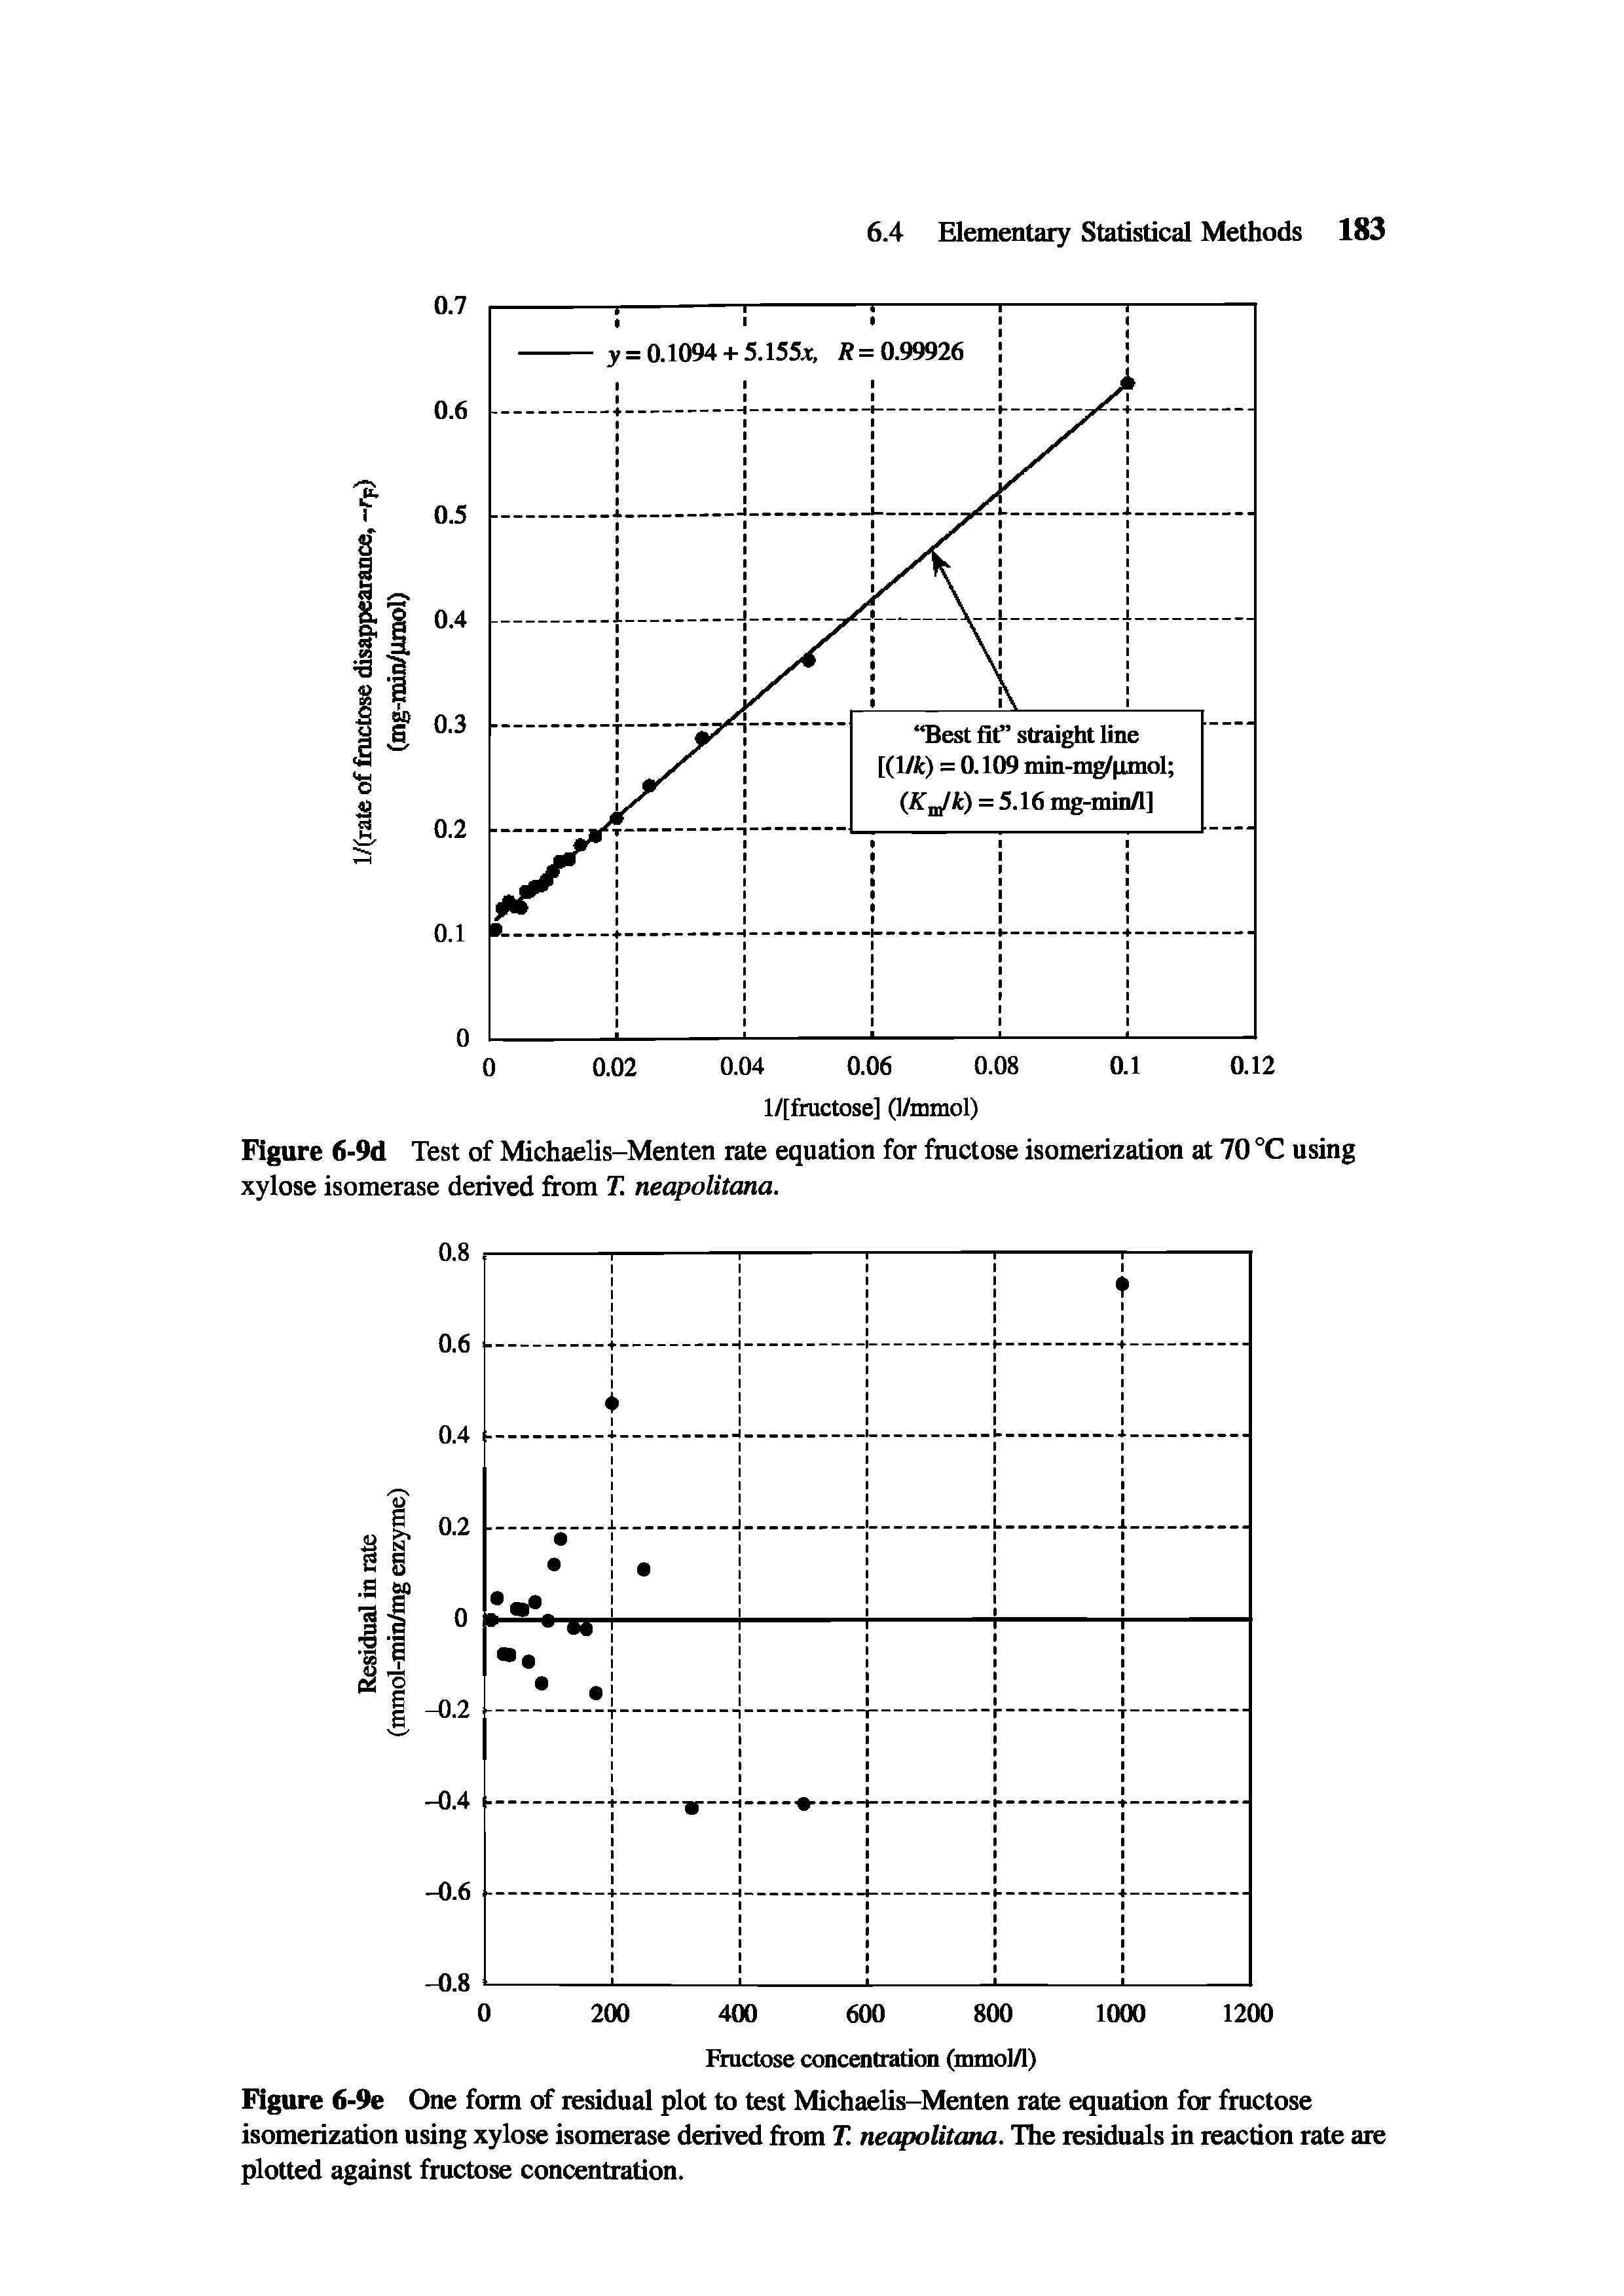 Figure 6-9d Test of Michaelis-Menten rate equation for fructose isomerization at 70 °C using xylose isomerase derived from T. neapolitana.